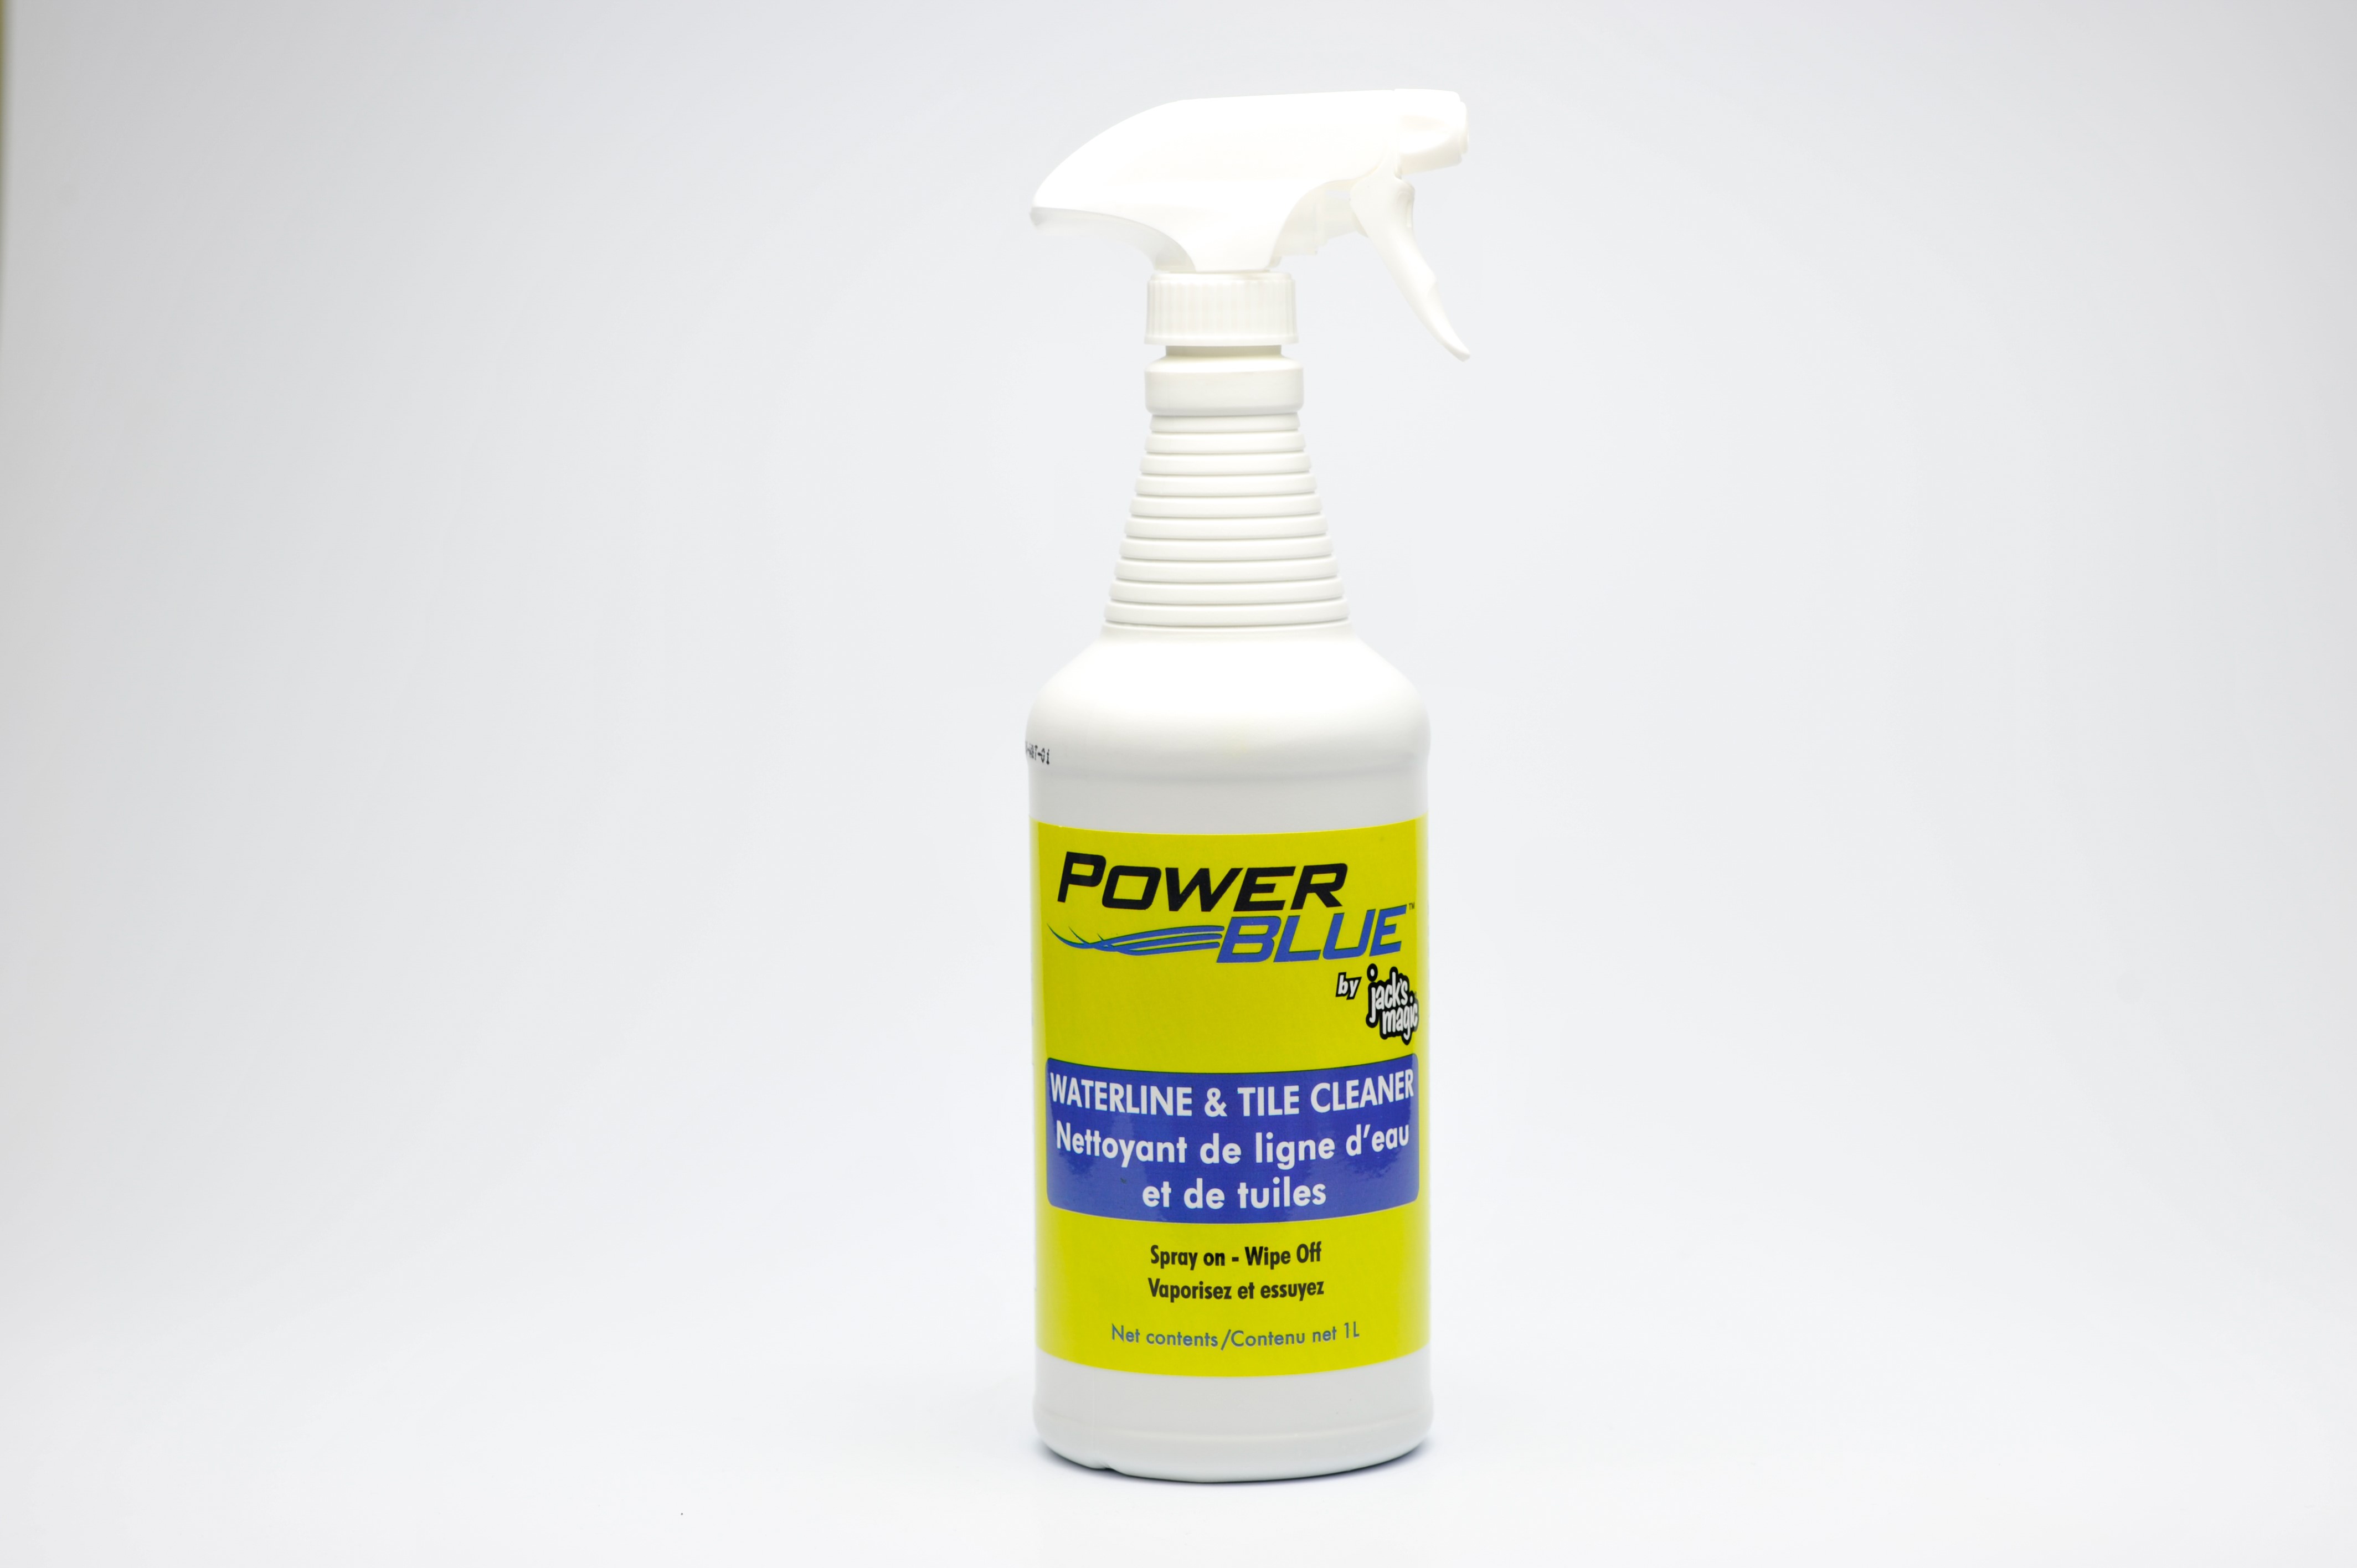 POWERBLUE WATERLINE AND TILE CLEANER